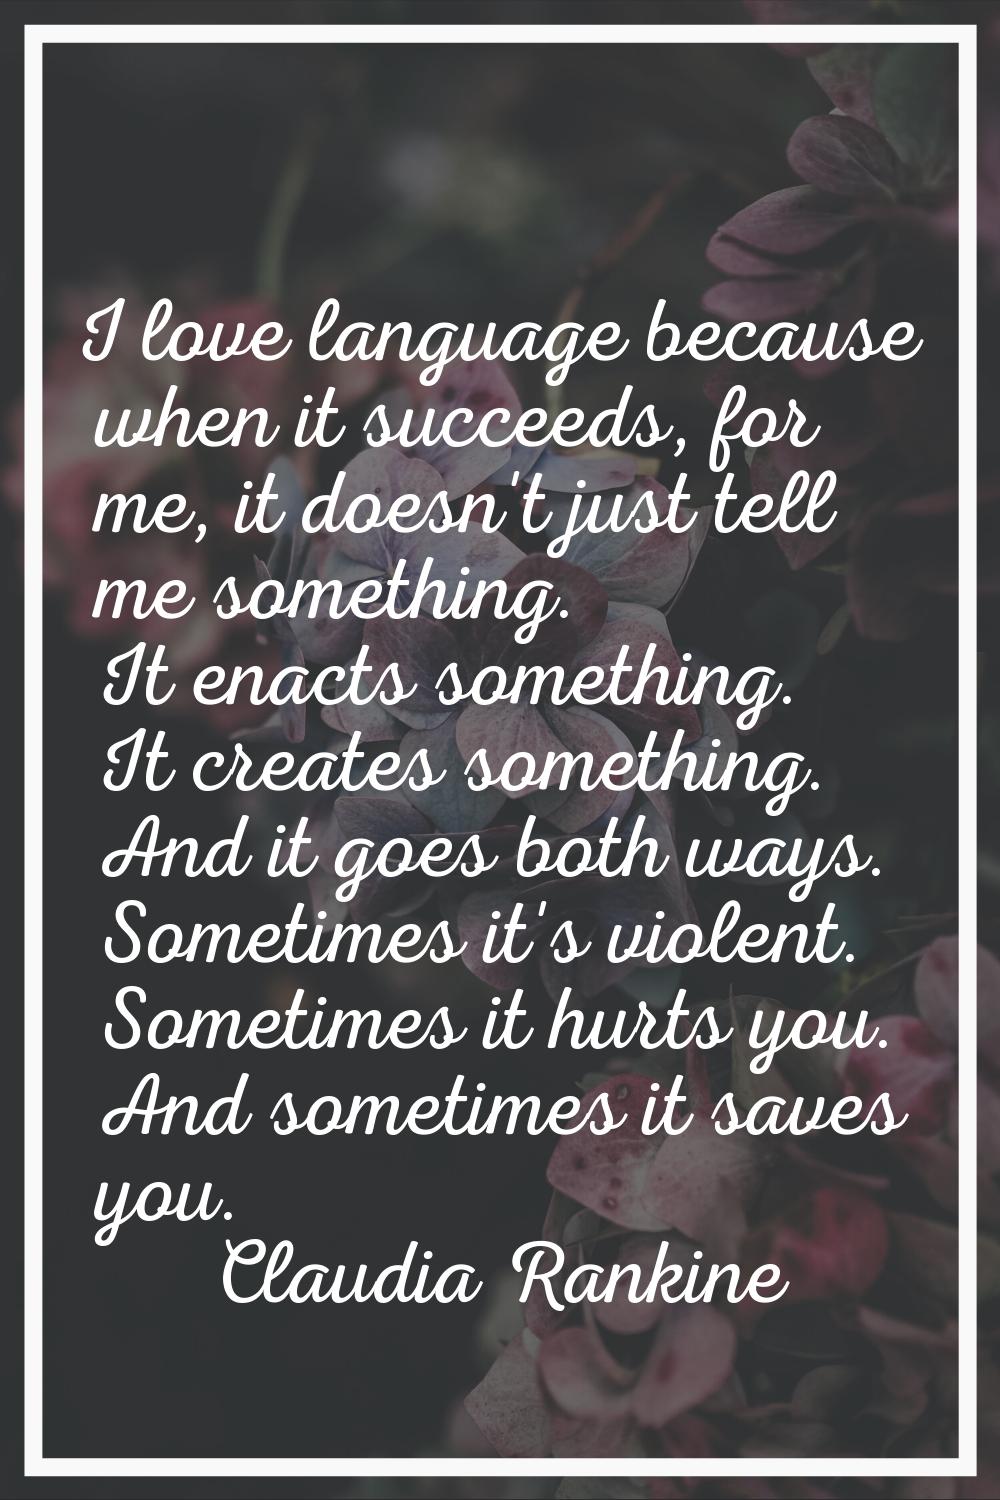 I love language because when it succeeds, for me, it doesn't just tell me something. It enacts some